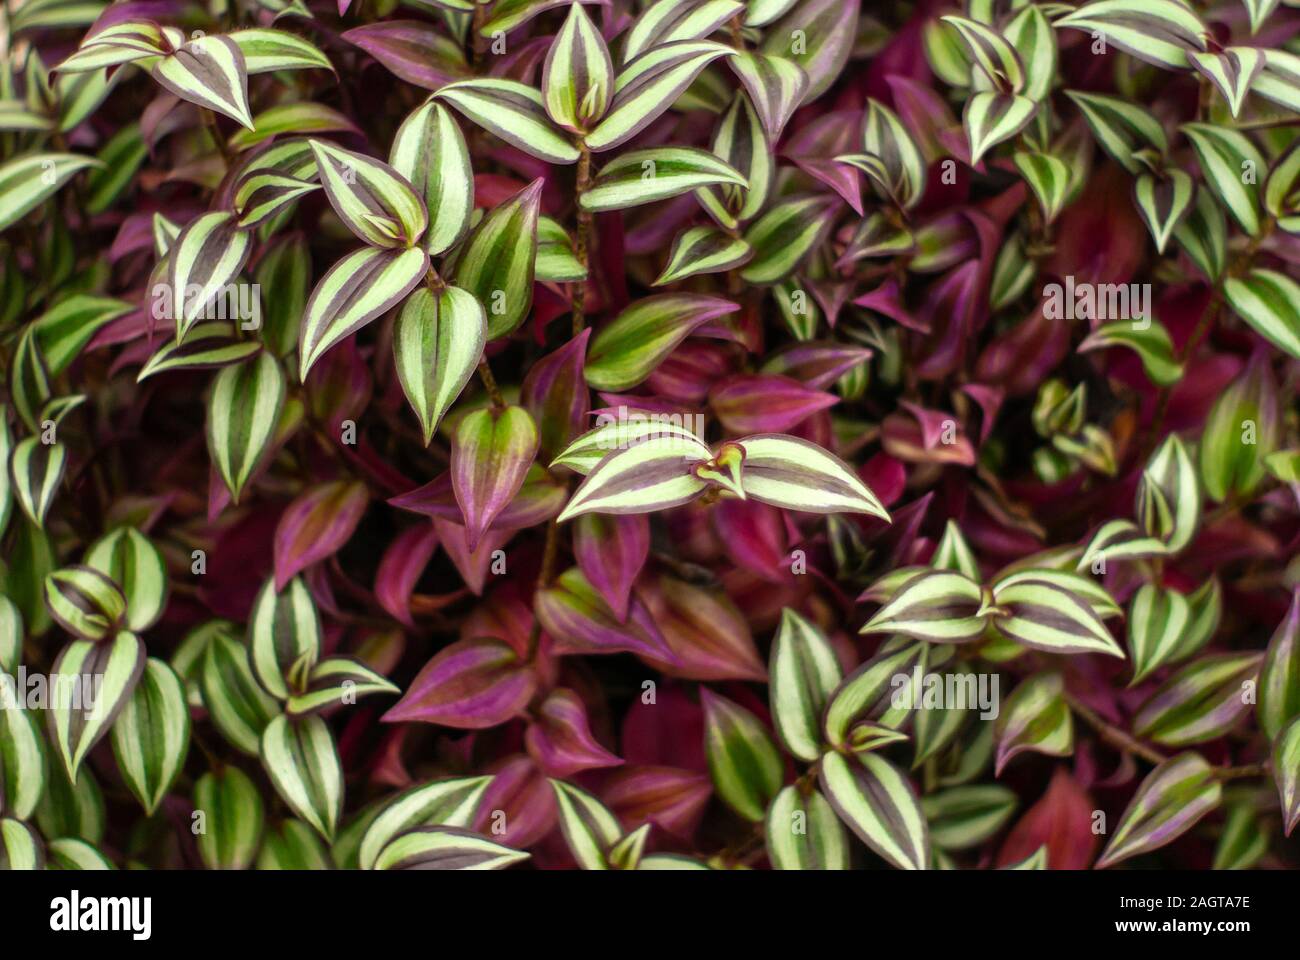 natural floral background of light green and purple striped leaves of a house plant of tradescantia zebrina Stock Photo